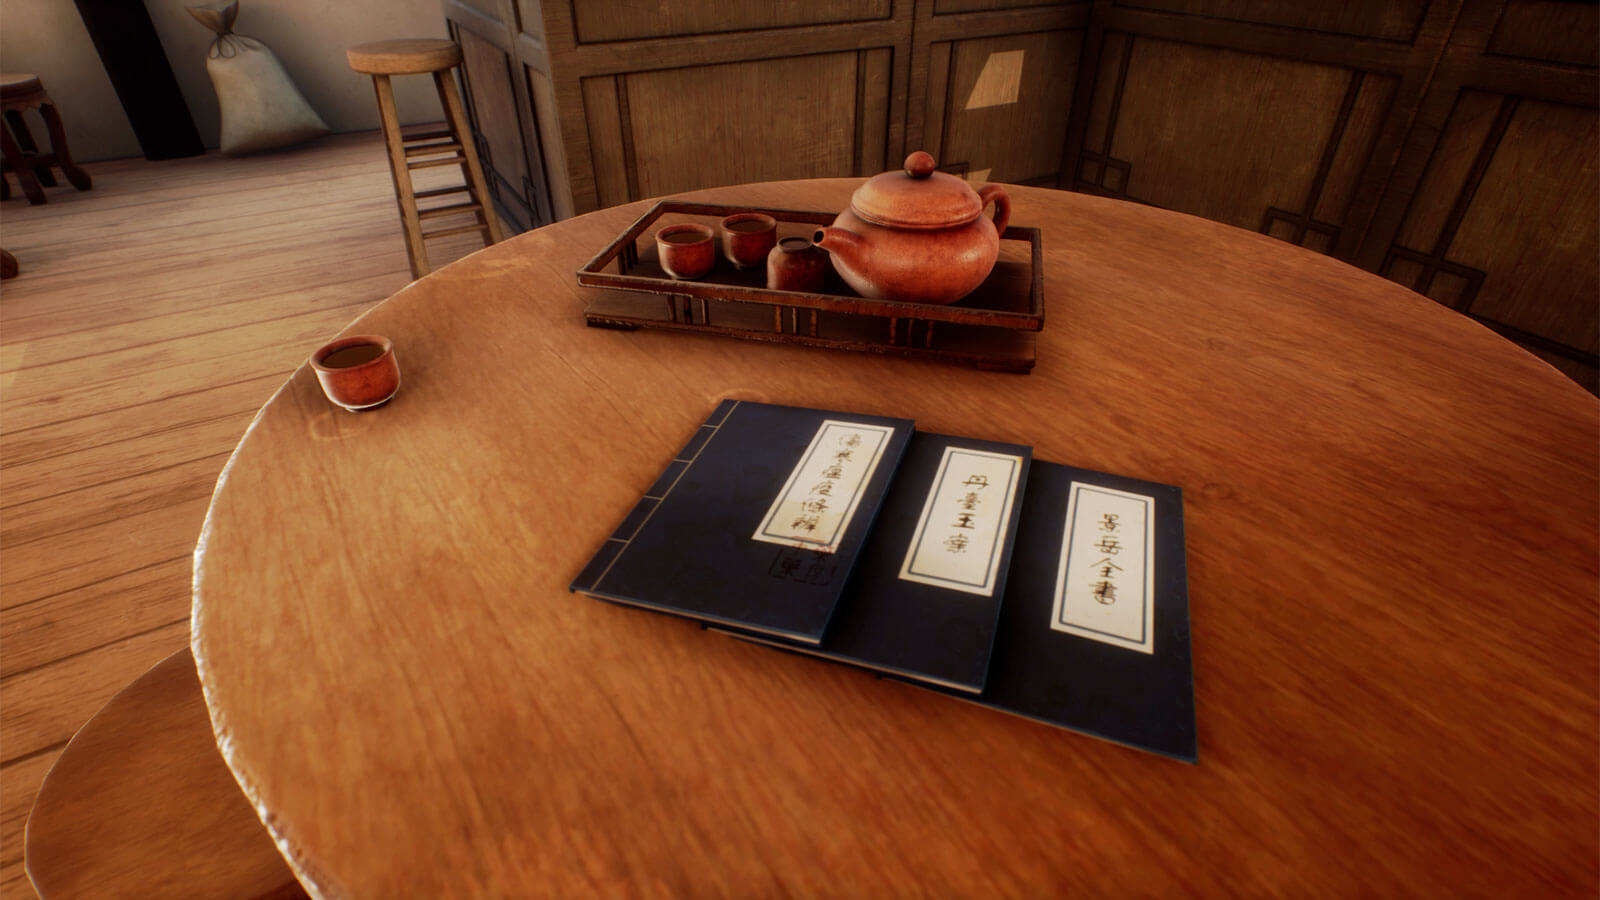 Three menus and a tea set collection lay at the top of a round table.